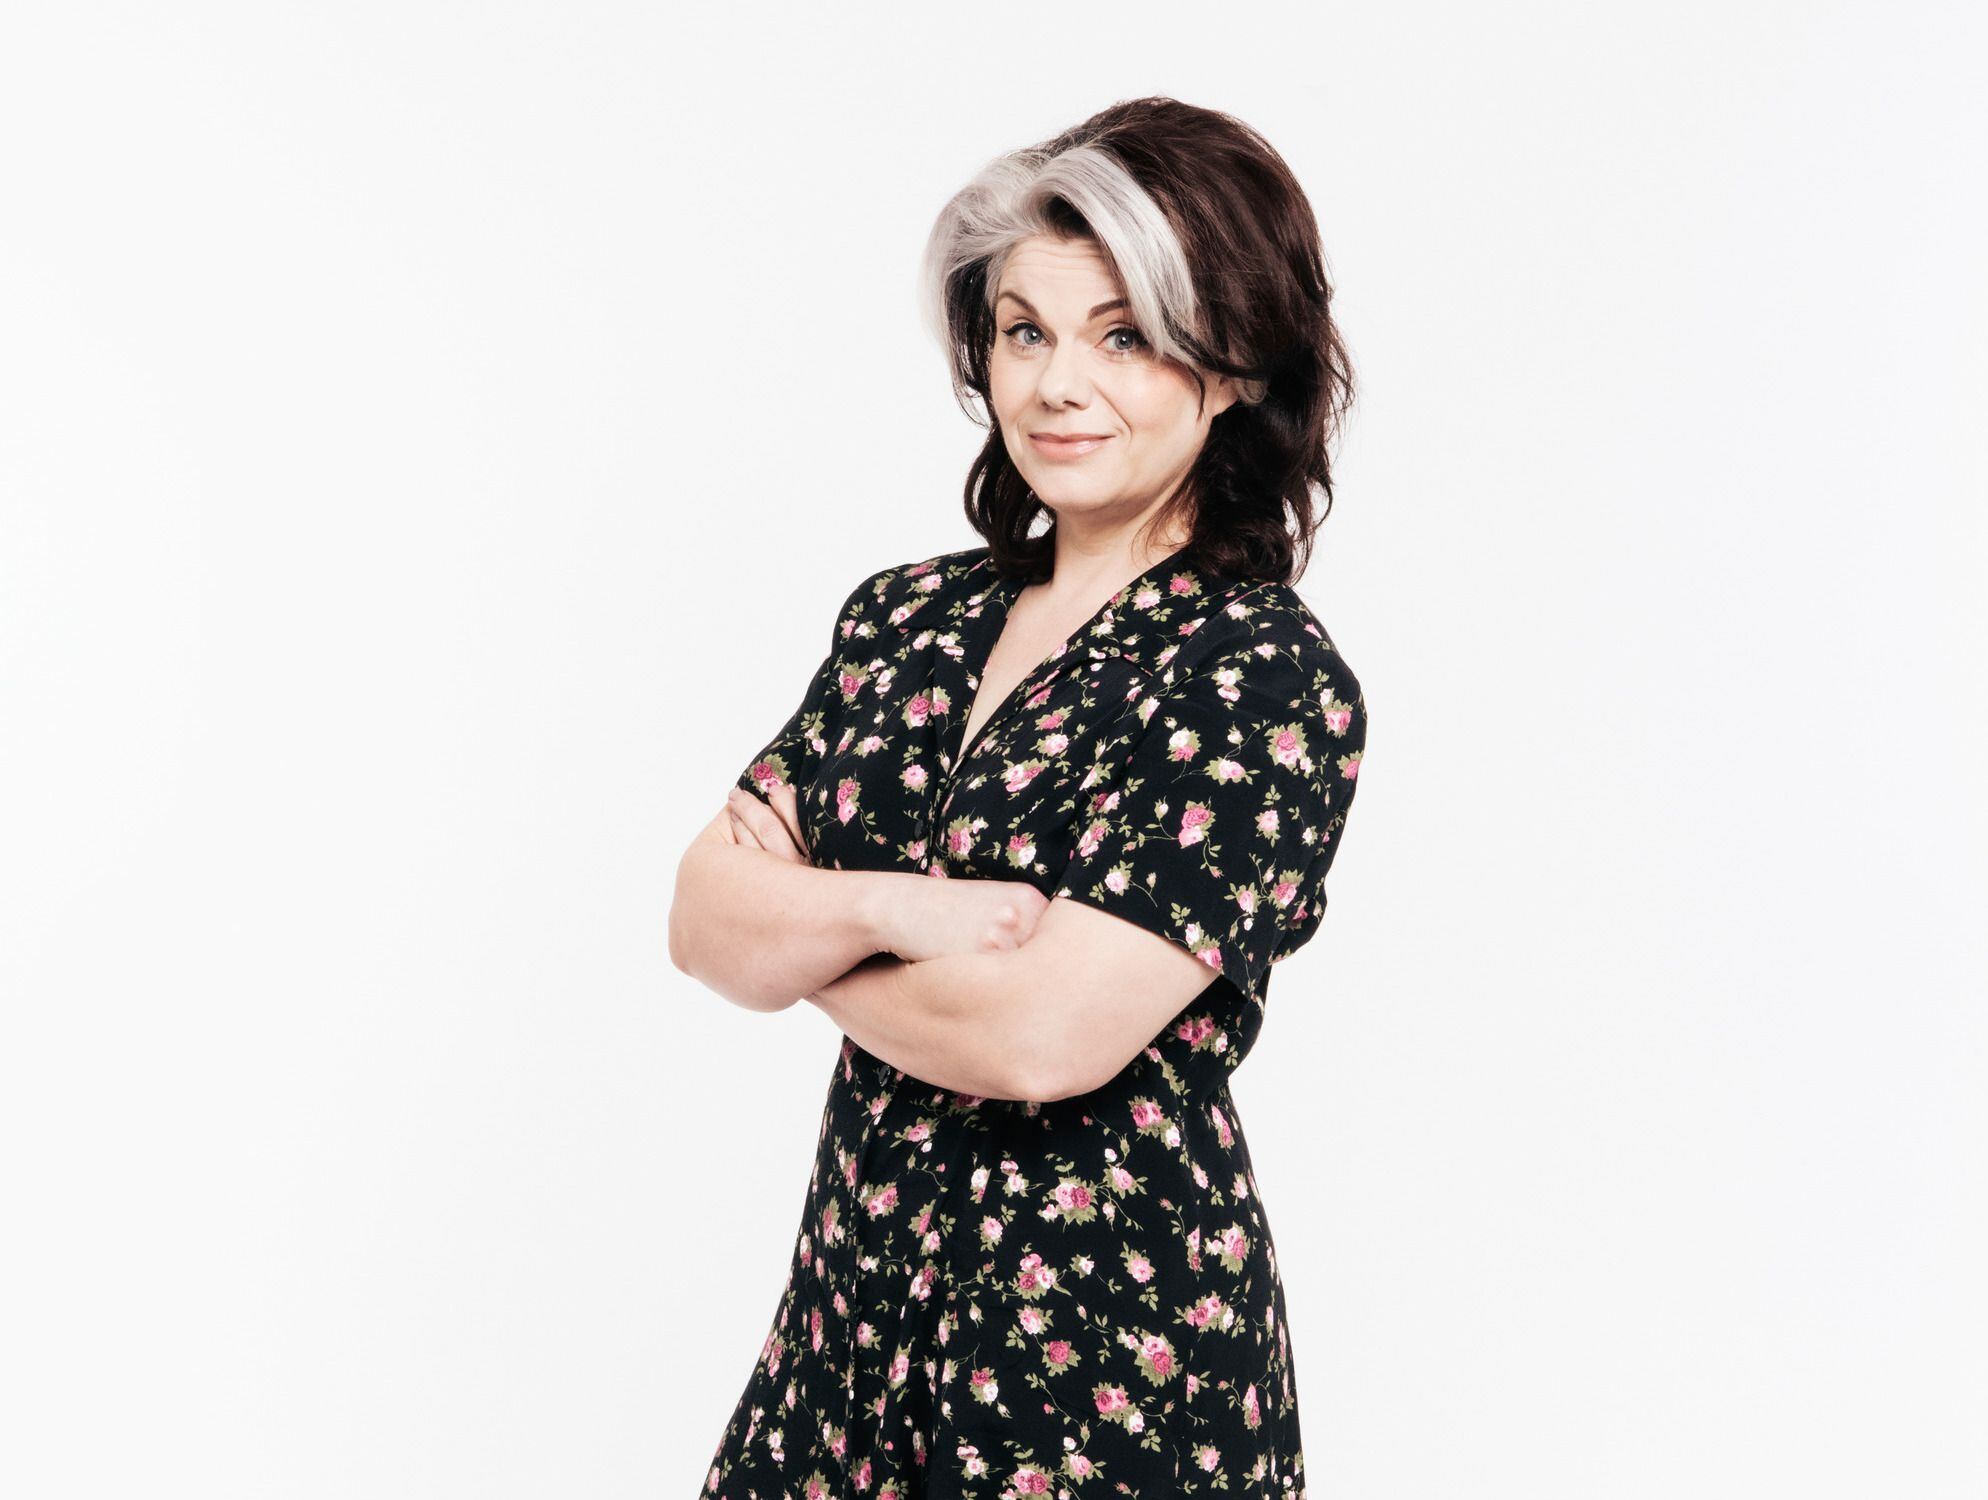 'I want to have a conversation about men': Wolverhampton's Caitlin Moran prepares for home show